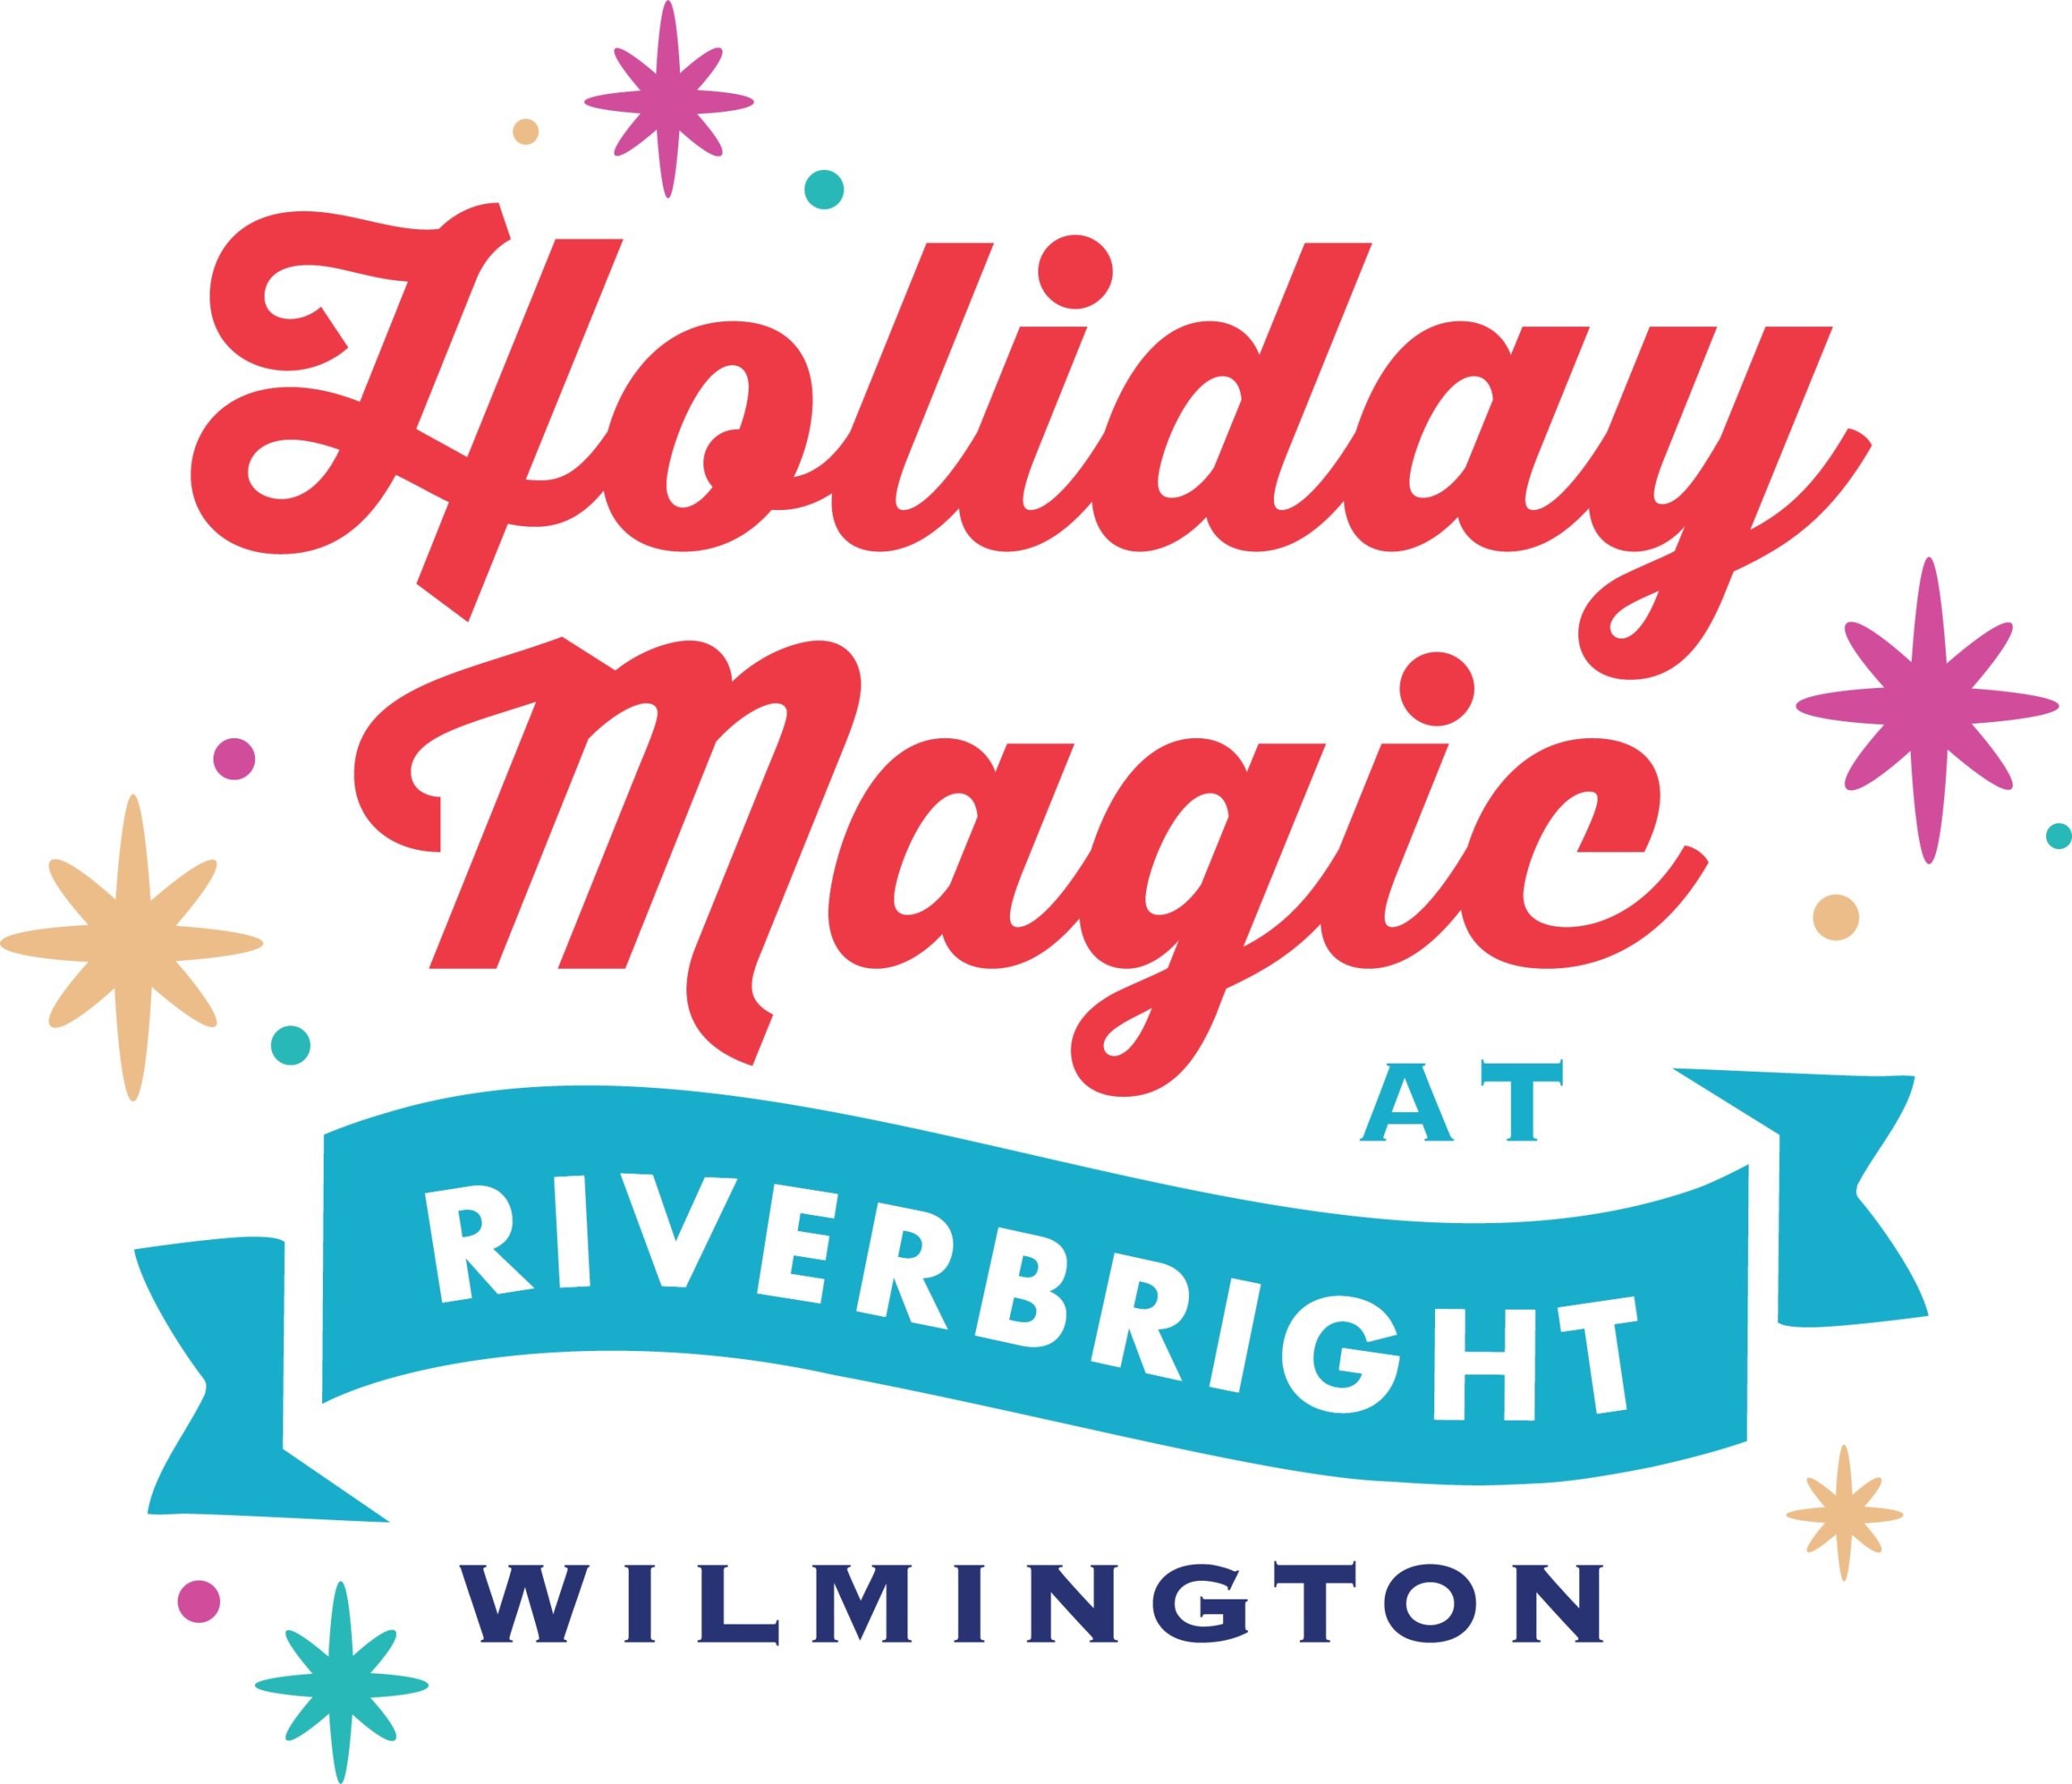 Riverfront Development Corporation Lights Up the Christina Riverwalk This Holiday Season and Beyond with Riverbright Wilmington